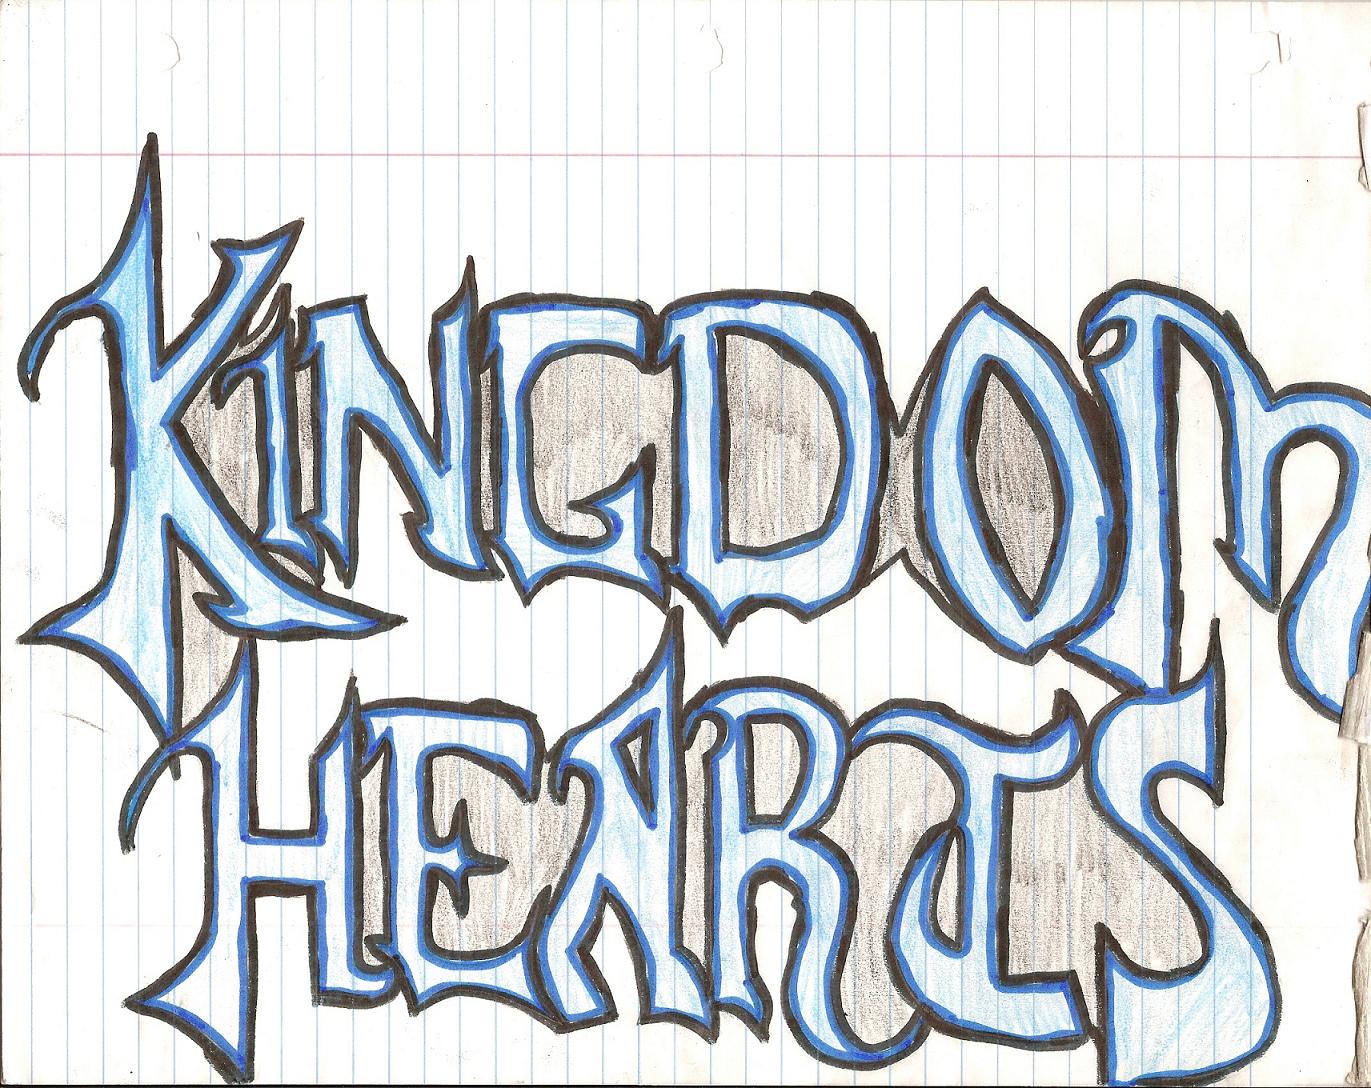 Kingdom Hearts Sign...thingy by Animeiskewlbecauseisaidso